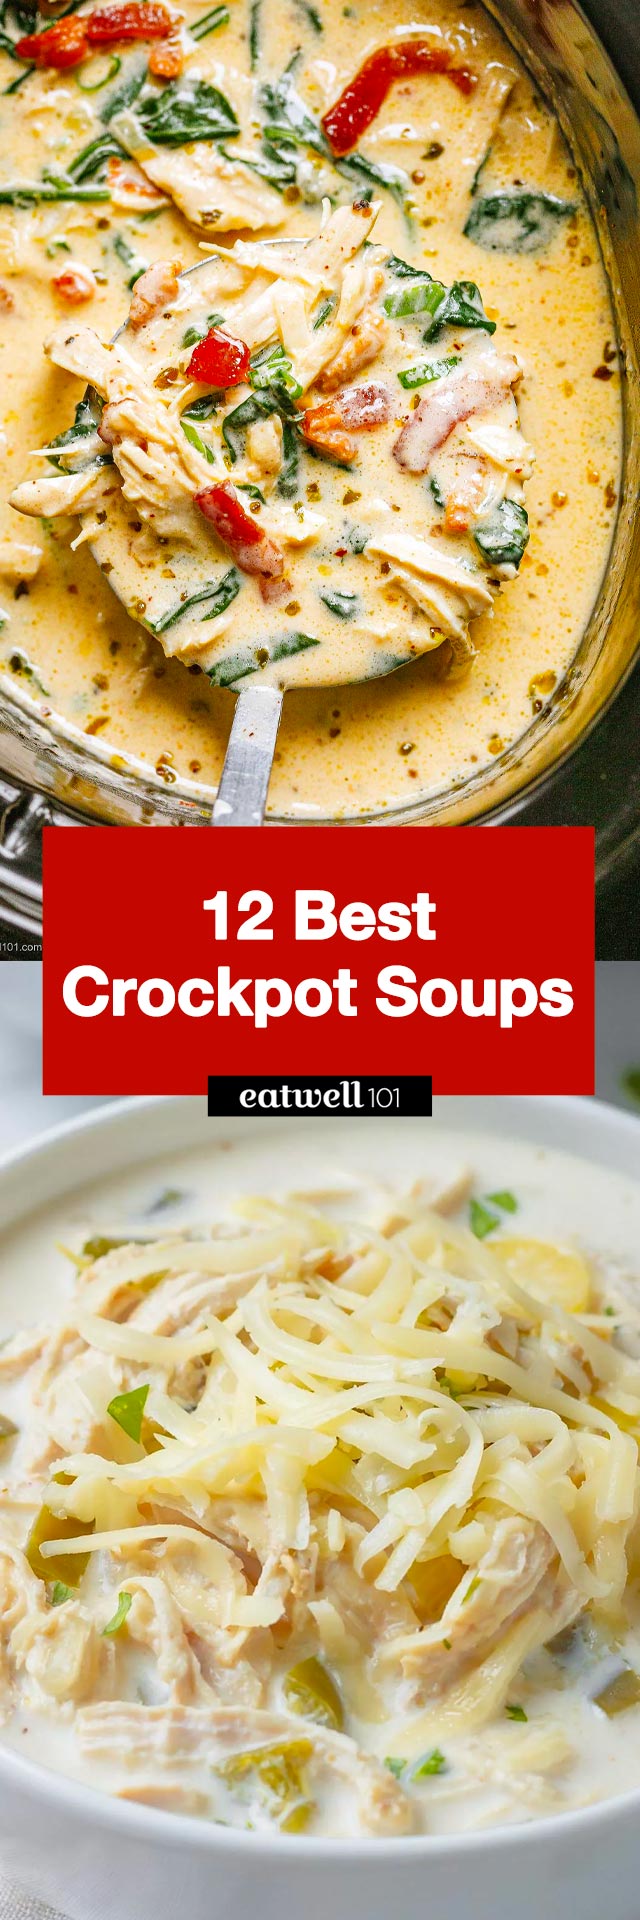 12 Best Crockpot Soup Recipe Ideas - #crockpot #slowcooker #soup #recipes #eatwell101 - Turn to your slow cooker for the best Crockpot soup recipes to ever hit your bowl. 